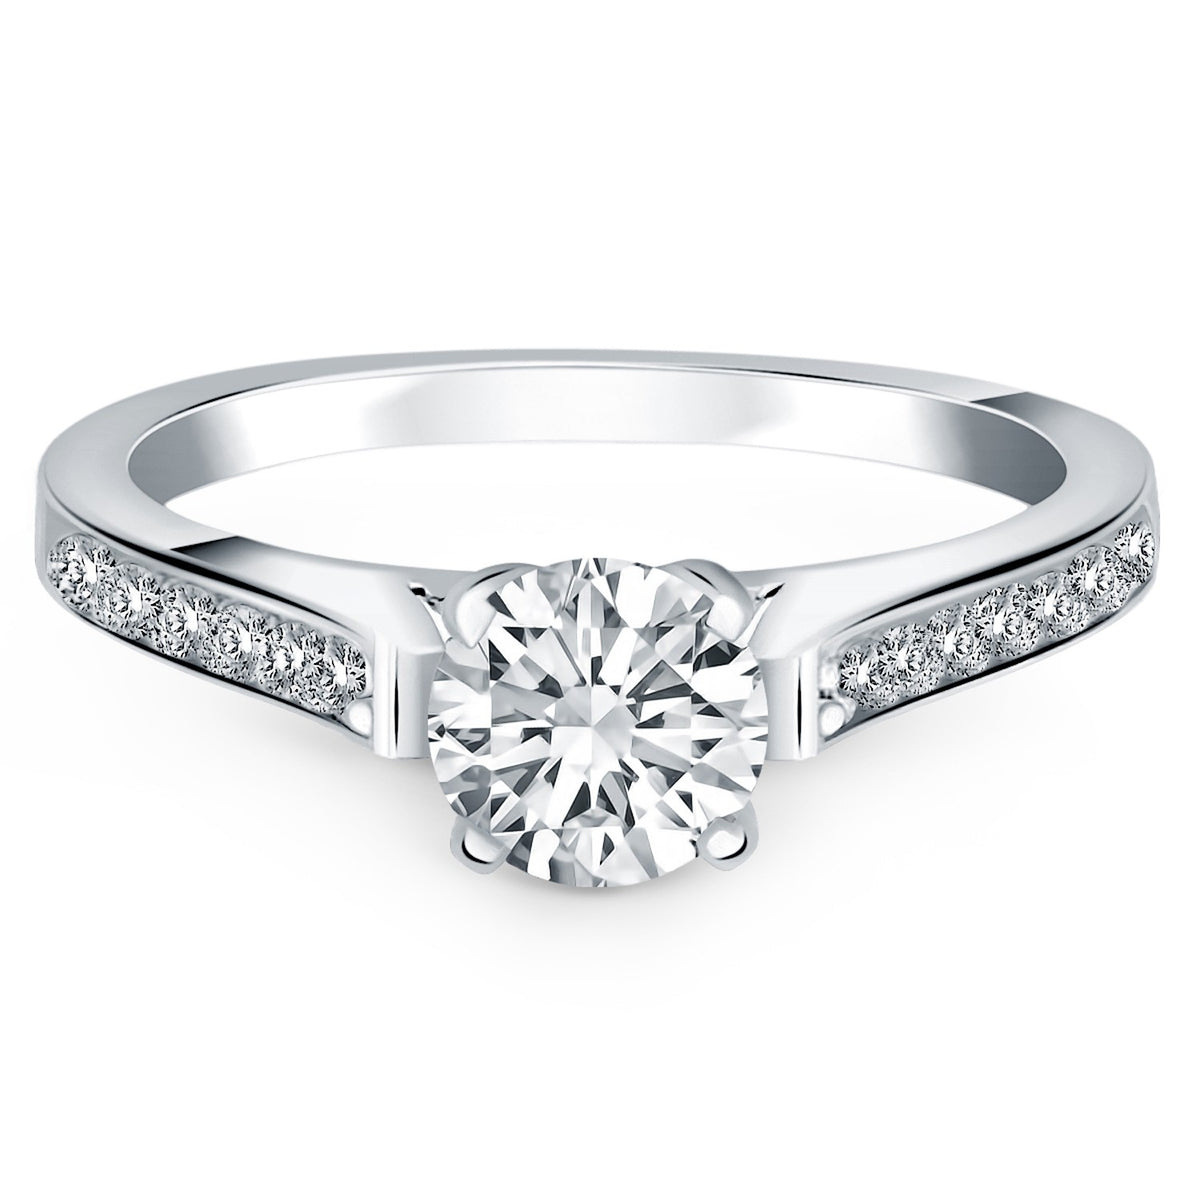 Pave Diamond Cathedral Engagement Ring - 14k White Gold